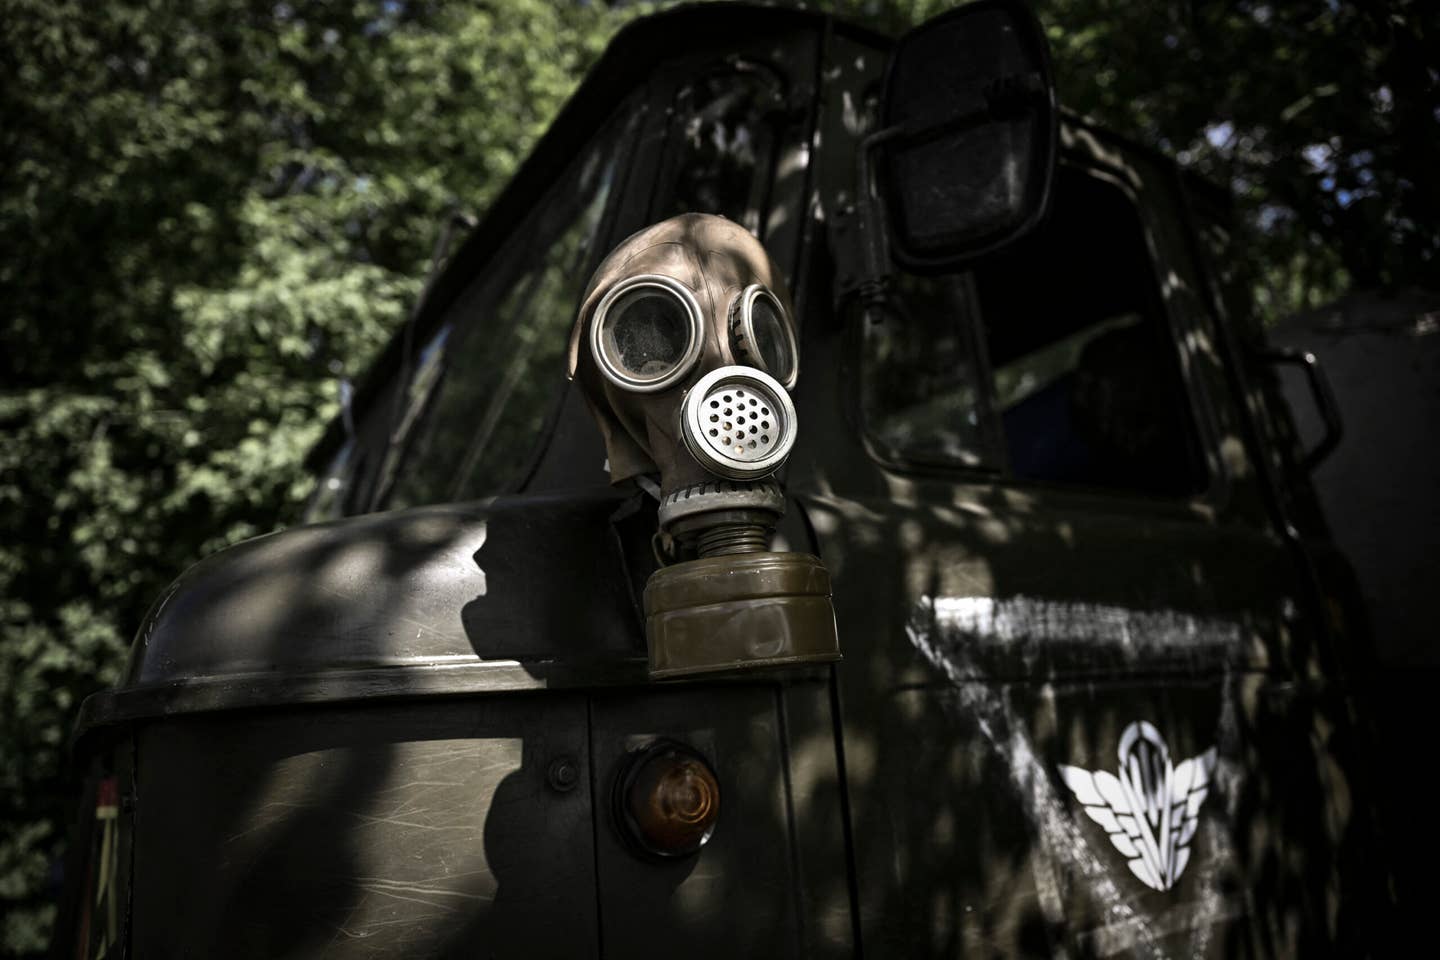 A Soviet-style respirator on a military vehicle at a checkpoint held by Ukrainian forces outside the city of Lysychansk in the eastern Ukrainian region of Donbas, in May 2022. <em>Photo by ARIS MESSINIS/AFP via Getty Images</em>